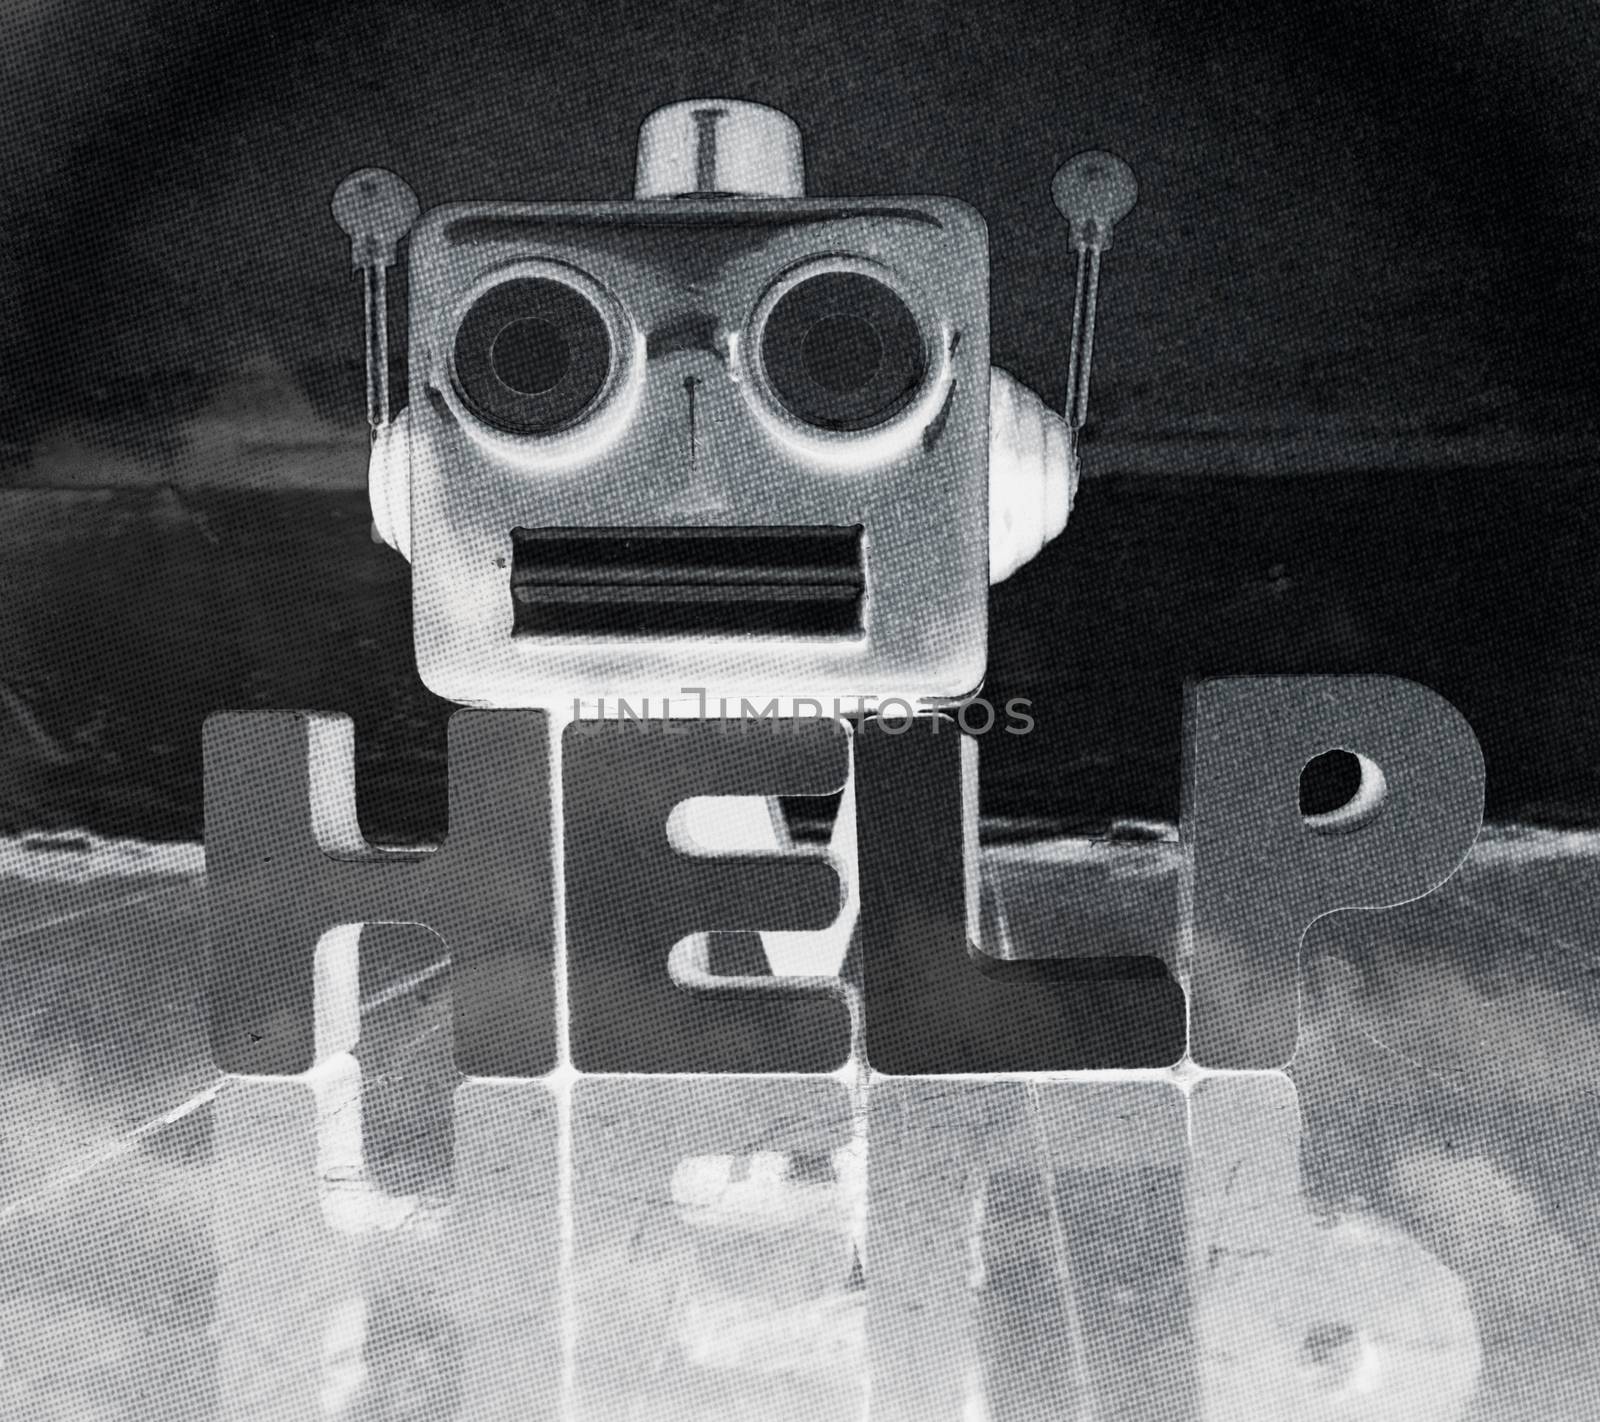 robot talking head in monochrome with the word  HELP on a wooden floor with reflection